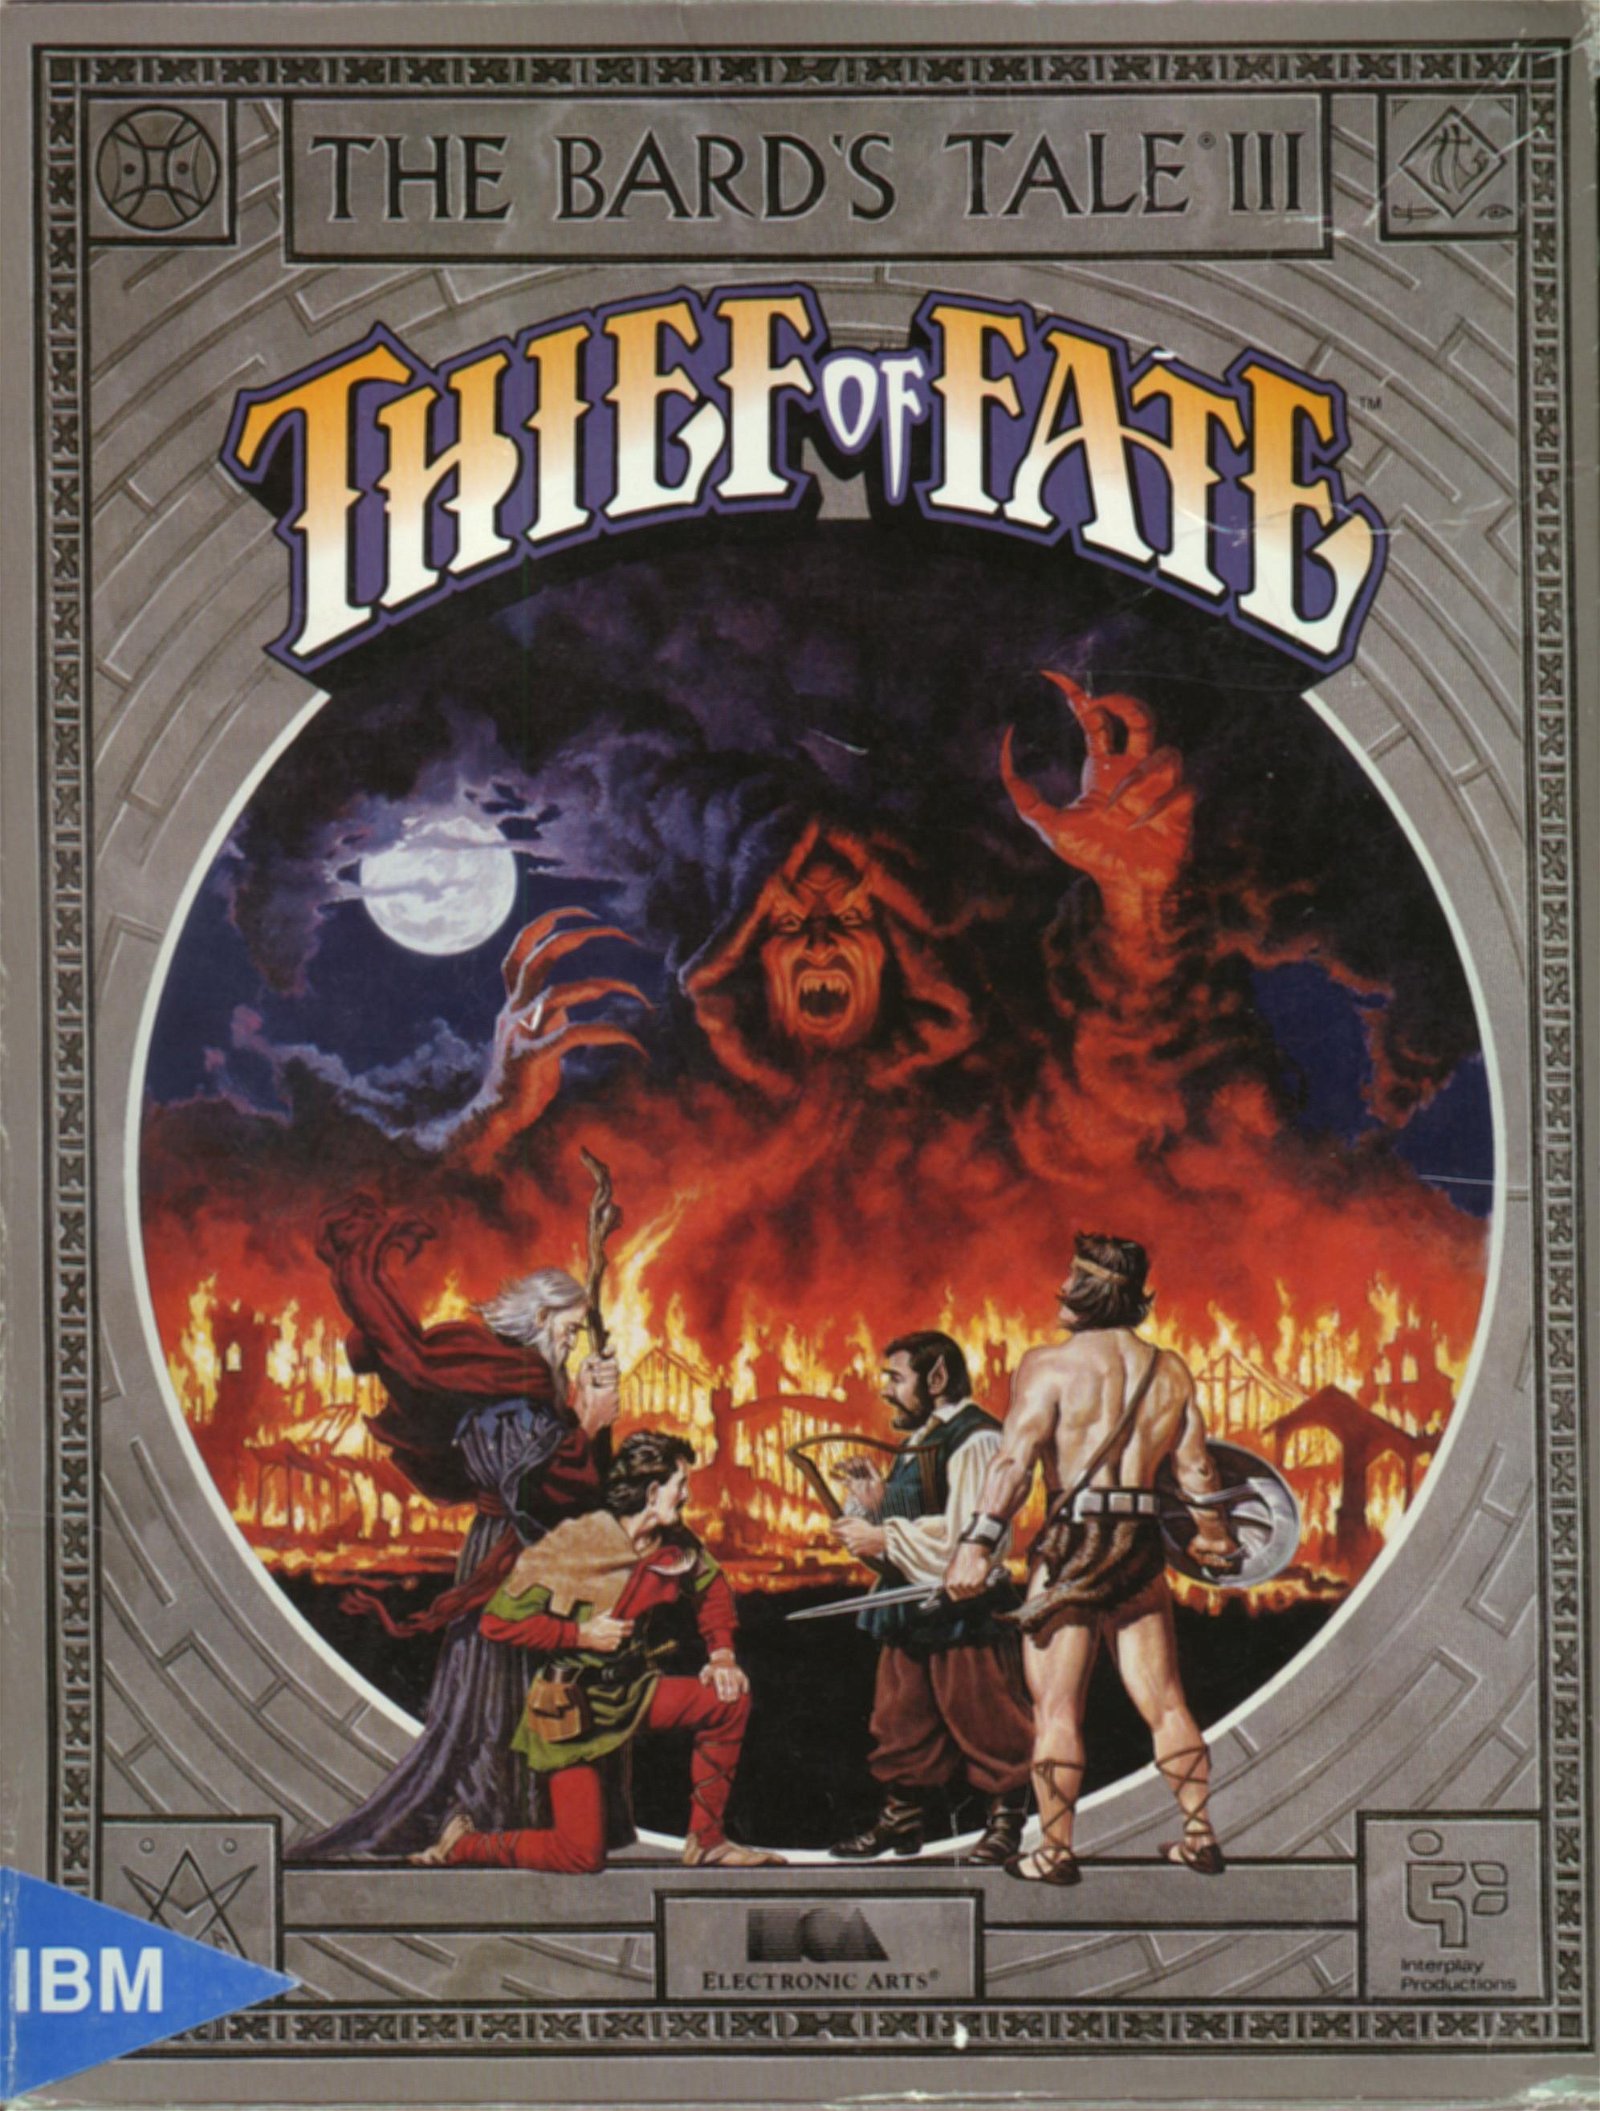 Image of The Bard's Tale III: Thief of Fate